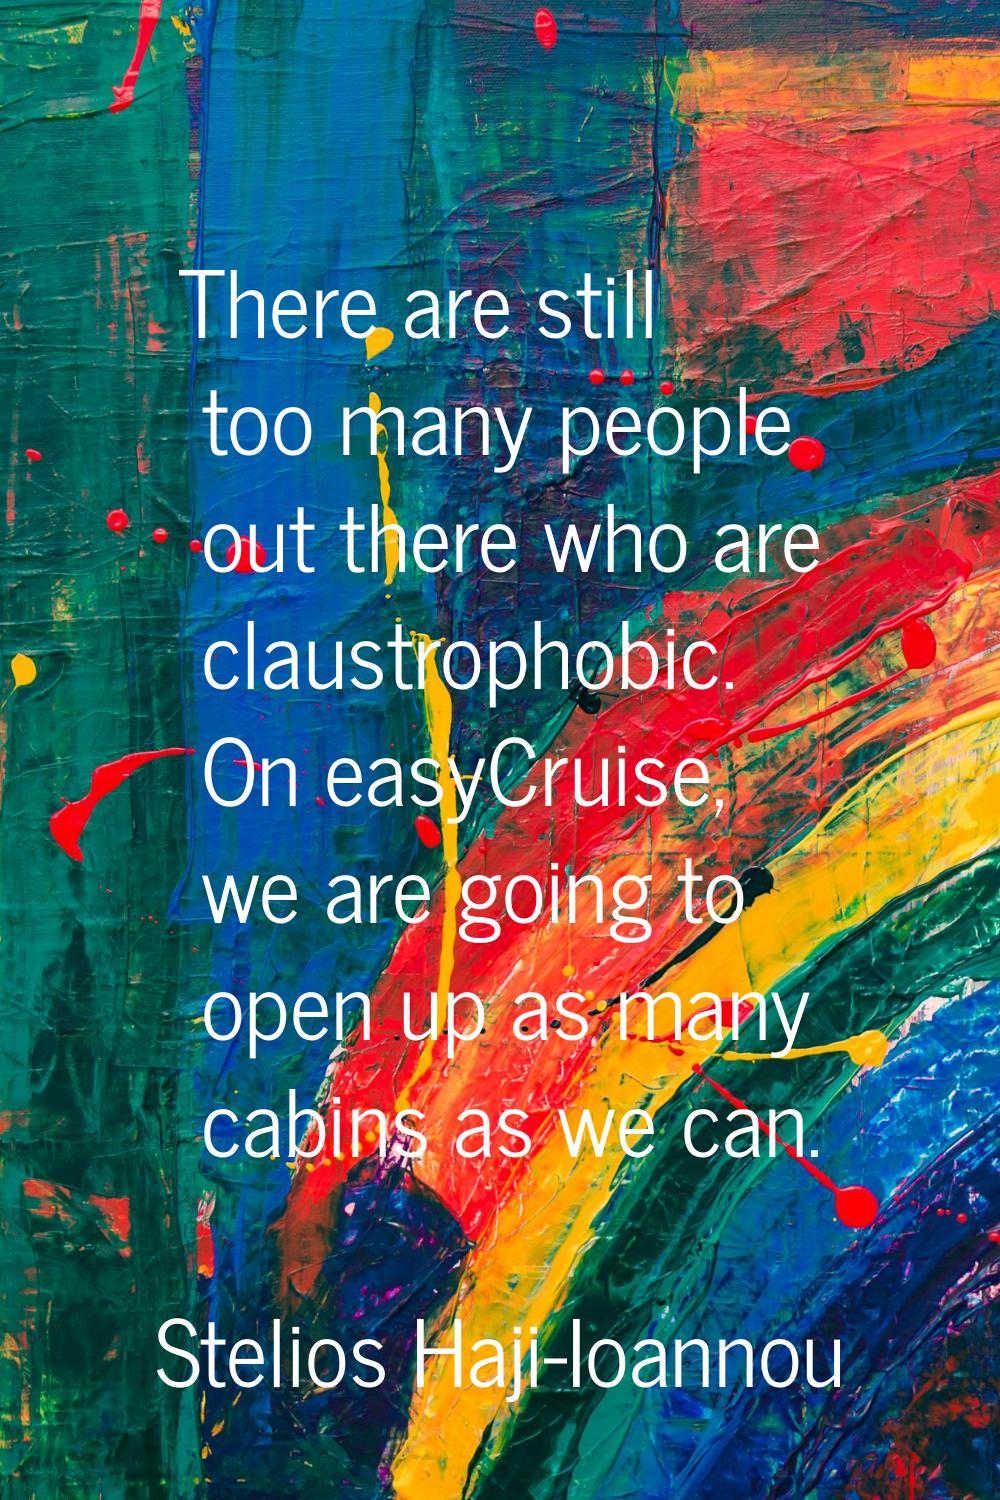 There are still too many people out there who are claustrophobic. On easyCruise, we are going to op